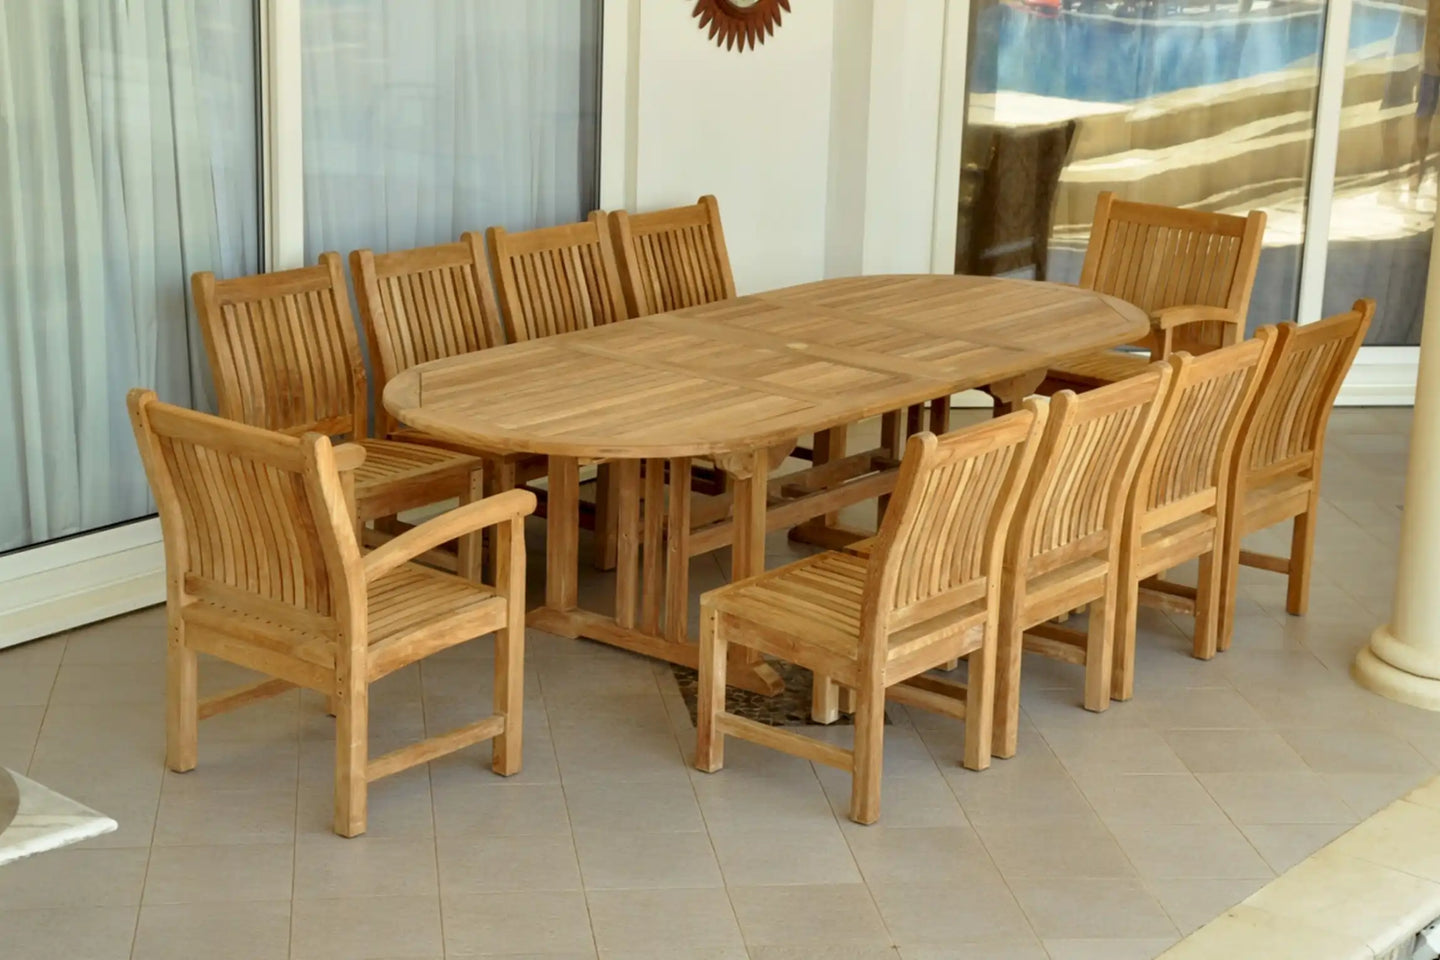 Sahara Dining Side Chair 11-Pieces Oval Dining Set